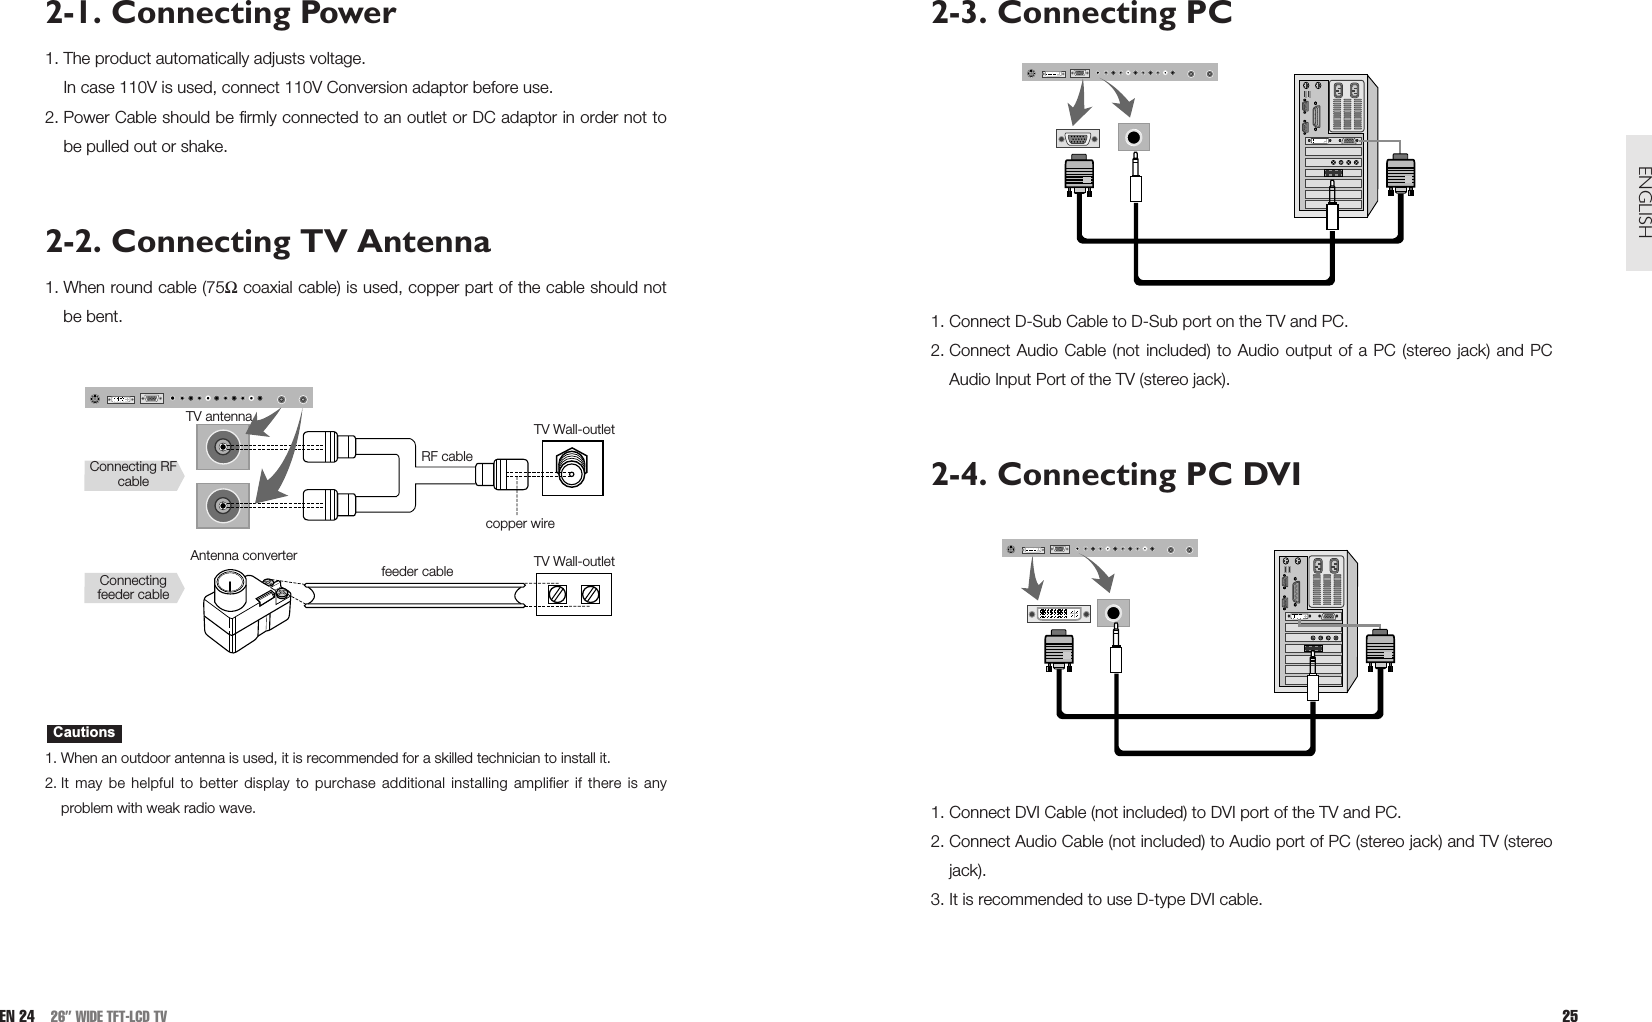 2-3. Connecting PC1. Connect D-Sub Cable to D-Sub port on the TV and PC.2. Connect Audio Cable (not included) to Audio output of a PC (stereo jack) and PCAudio Input Port of the TV (stereo jack).2-4. Connecting PC DVI1. Connect DVI Cable (not included) to DVI port of the TV and PC. 2. Connect Audio Cable (not included) to Audio port of PC (stereo jack) and TV (stereojack). 3. It is recommended to use D-type DVI cable.25ENGLISH2-1. Connecting Power1. The product automatically adjusts voltage.In case 110V is used, connect 110V Conversion adaptor before use. 2. Power Cable should be firmly connected to an outlet or DC adaptor in order not tobe pulled out or shake.2-2. Connecting TV Antenna1. When round cable (75Ωcoaxial cable) is used, copper part of the cable should notbe bent. 1. When an outdoor antenna is used, it is recommended for a skilled technician to install it. 2. It may be helpful to better display to purchase additional installing amplifier if there is anyproblem with weak radio wave.CautionsEN 24 26” WIDE TFT-LCD TVTV antennaAntenna converterConnecting RFcableConnectingfeeder cableRF cablefeeder cablecopper wireTV Wall-outletTV Wall-outlet